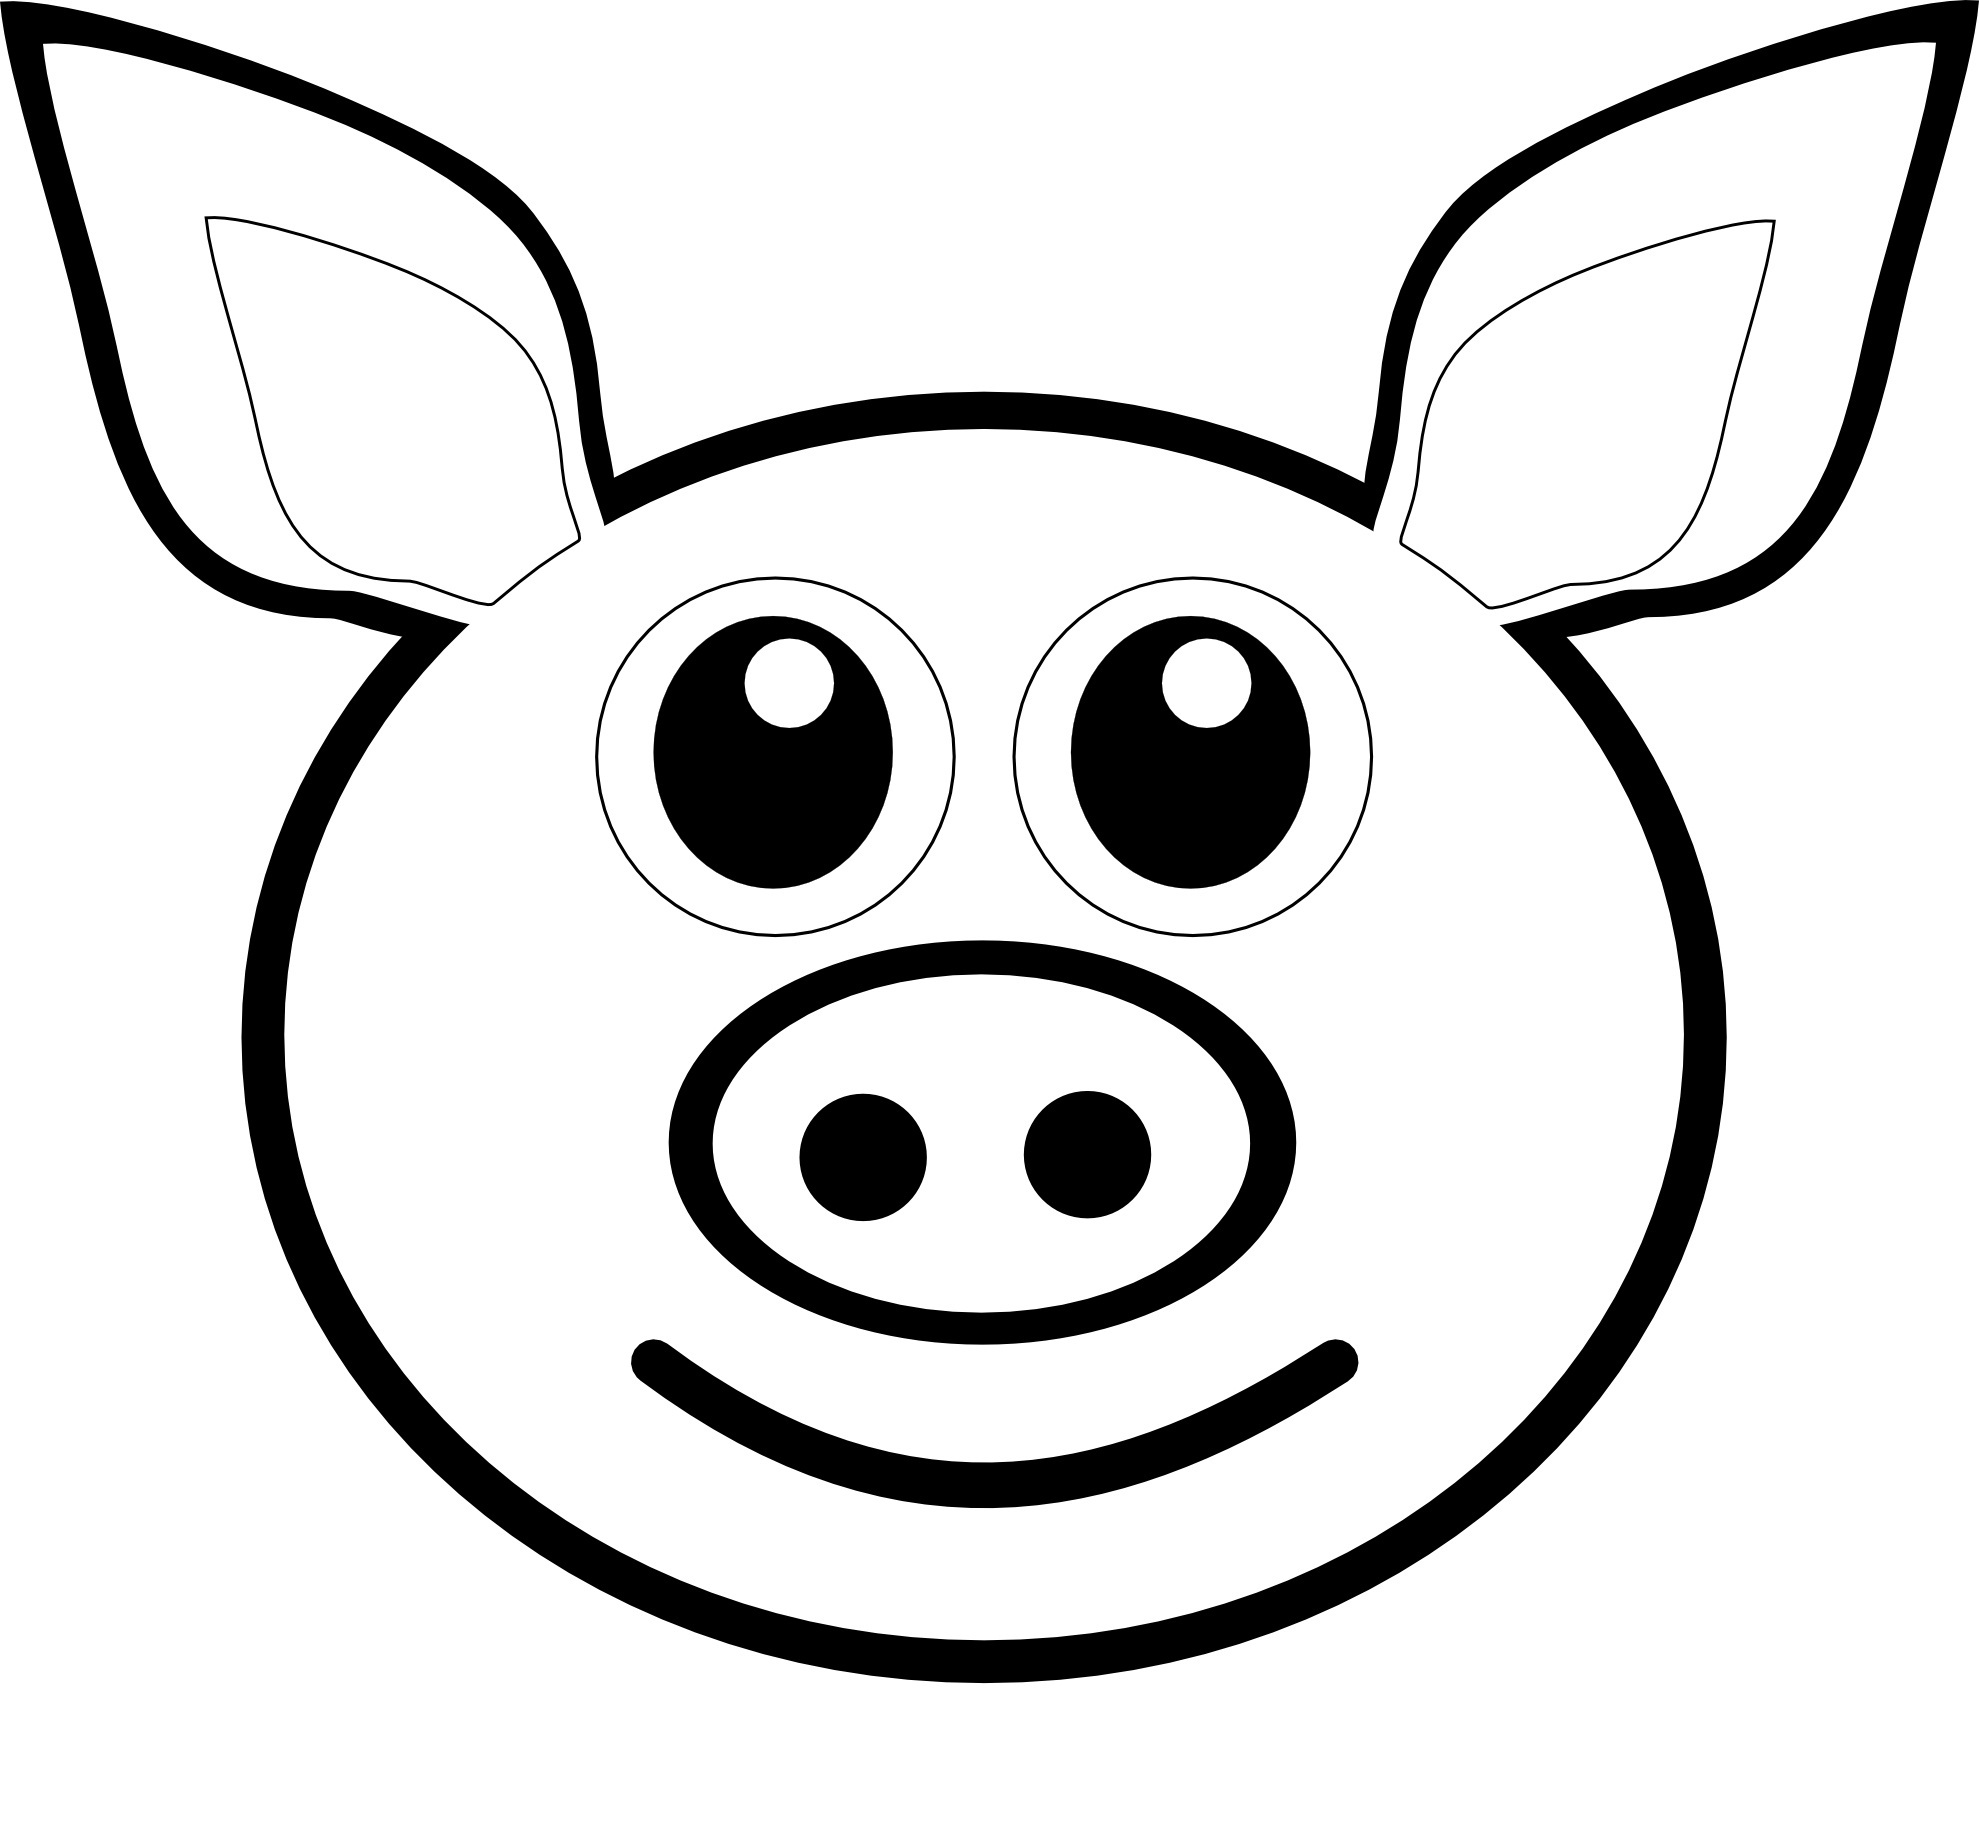 Printable Pig Coloring Pages | Coloring Me